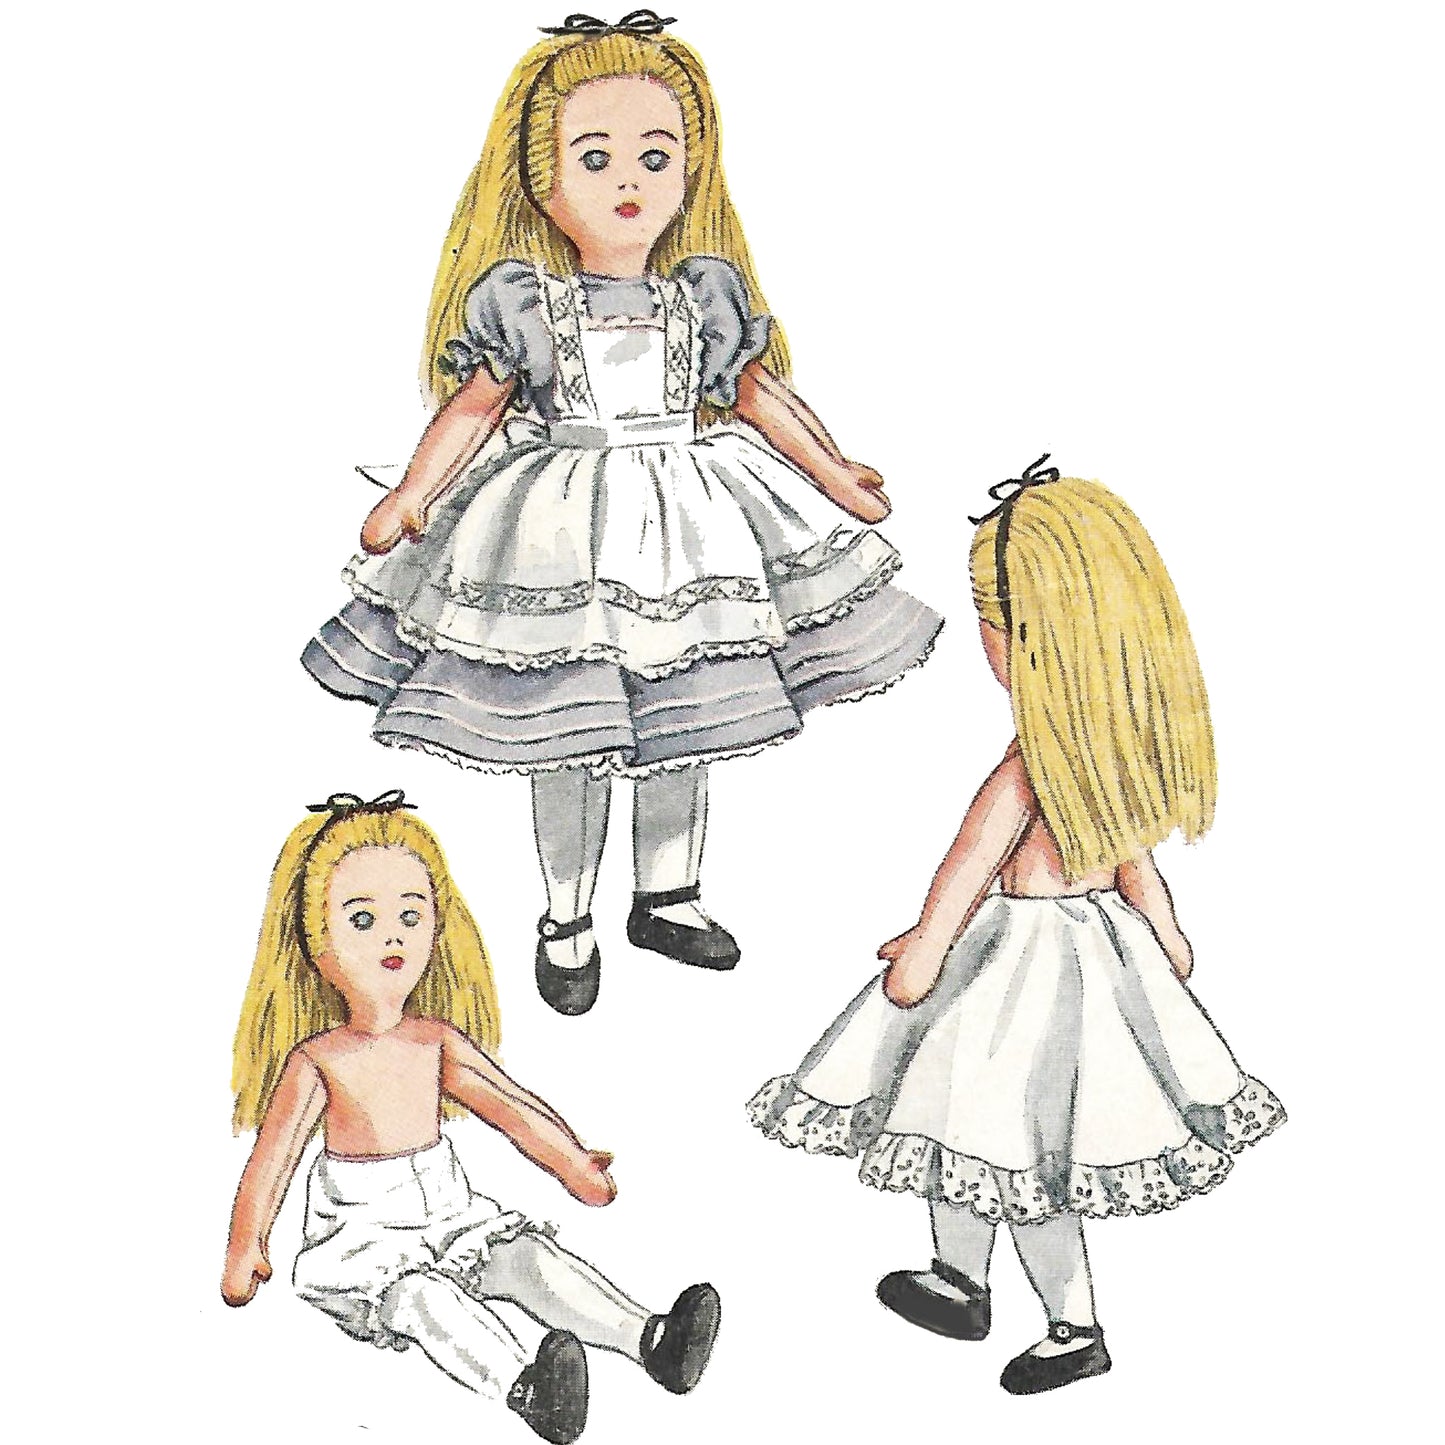 3 images of Vintage 'Alice in Wonderland' doll. One stood up showing the front of the doll, one sat wearing bloomers, and one showing the back view of the doll in the petticoat.